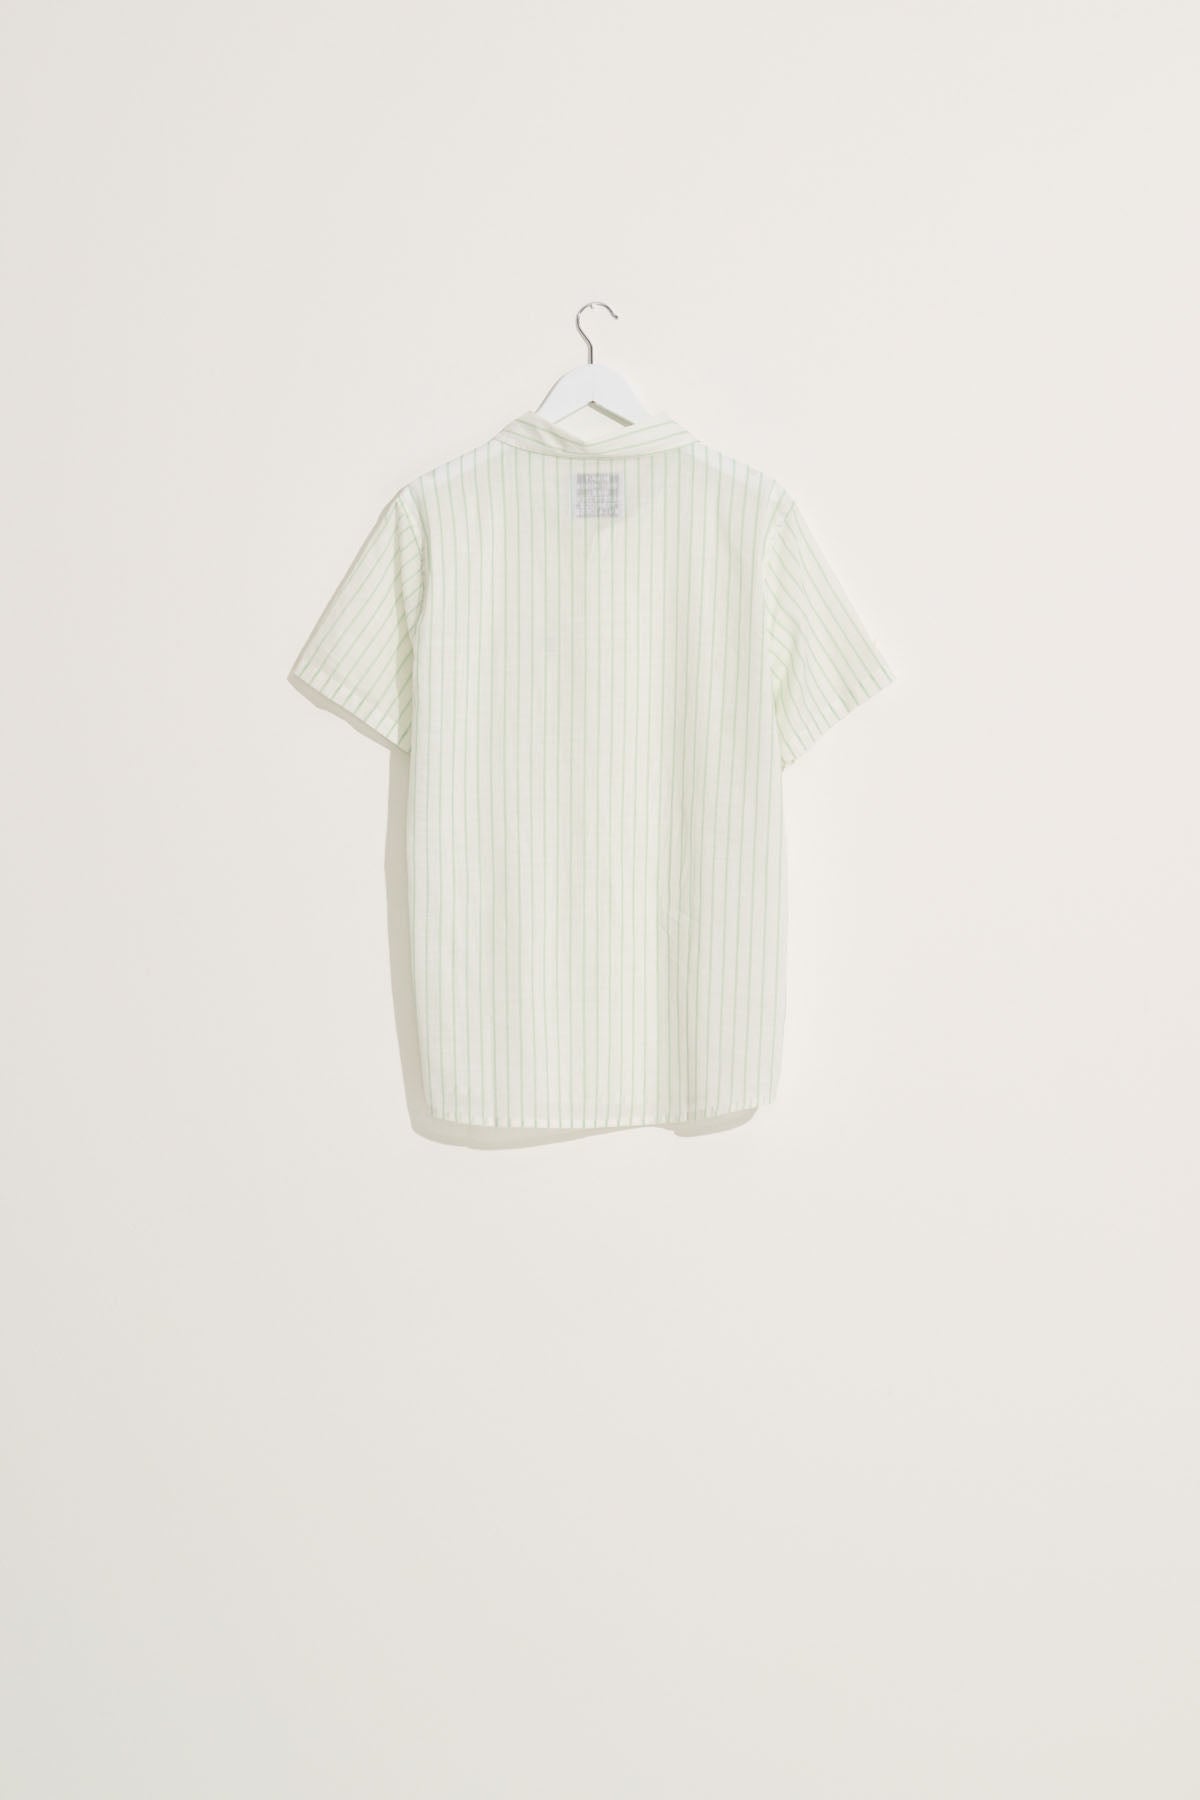 Misfit Shapes - Counter Tops SS Shirt - Dew Green Stripe